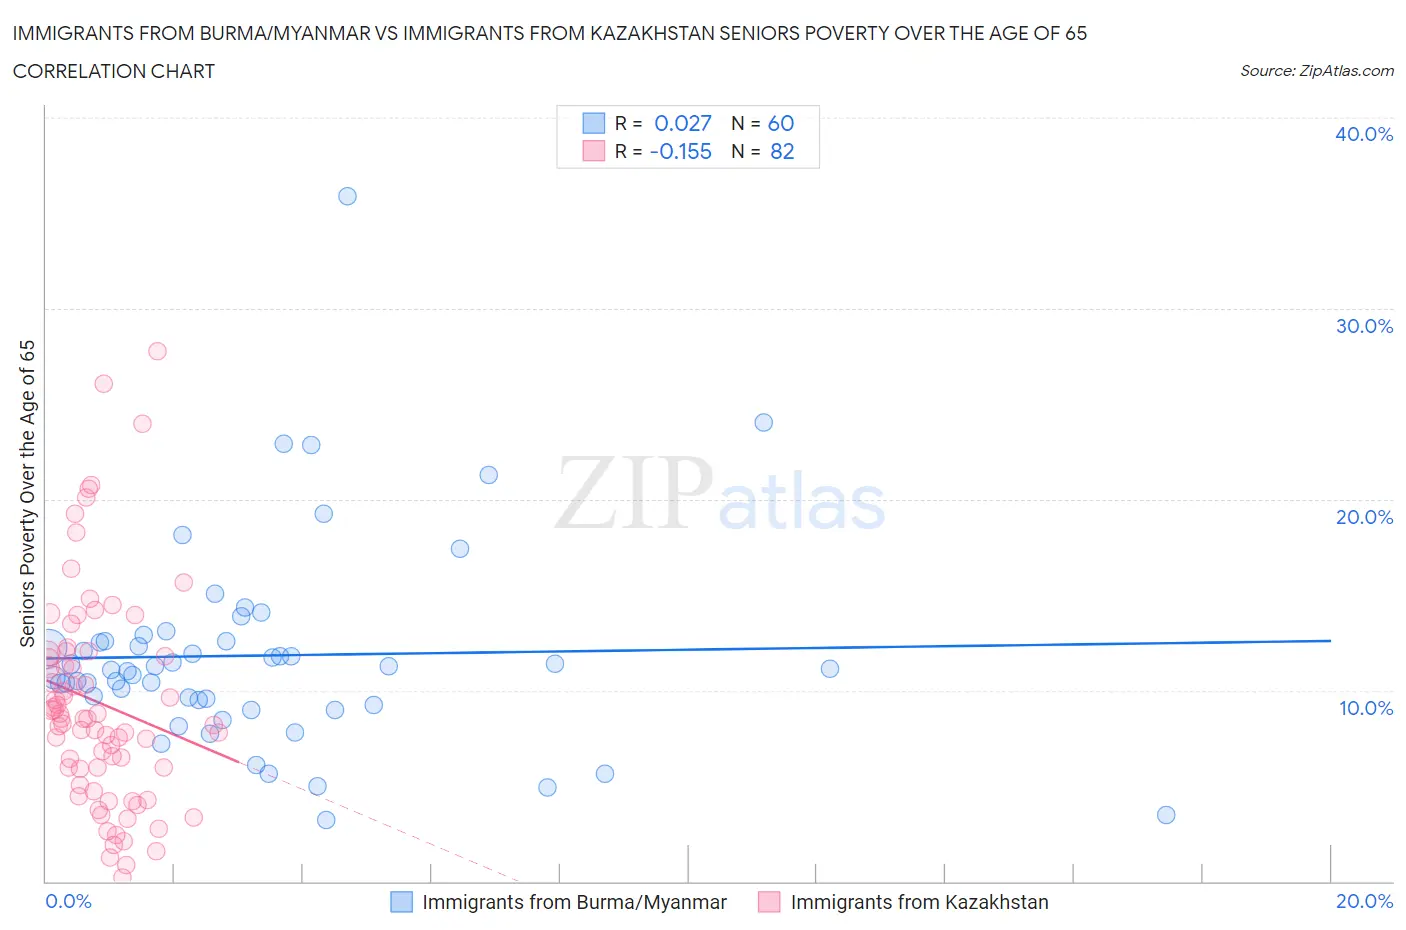 Immigrants from Burma/Myanmar vs Immigrants from Kazakhstan Seniors Poverty Over the Age of 65